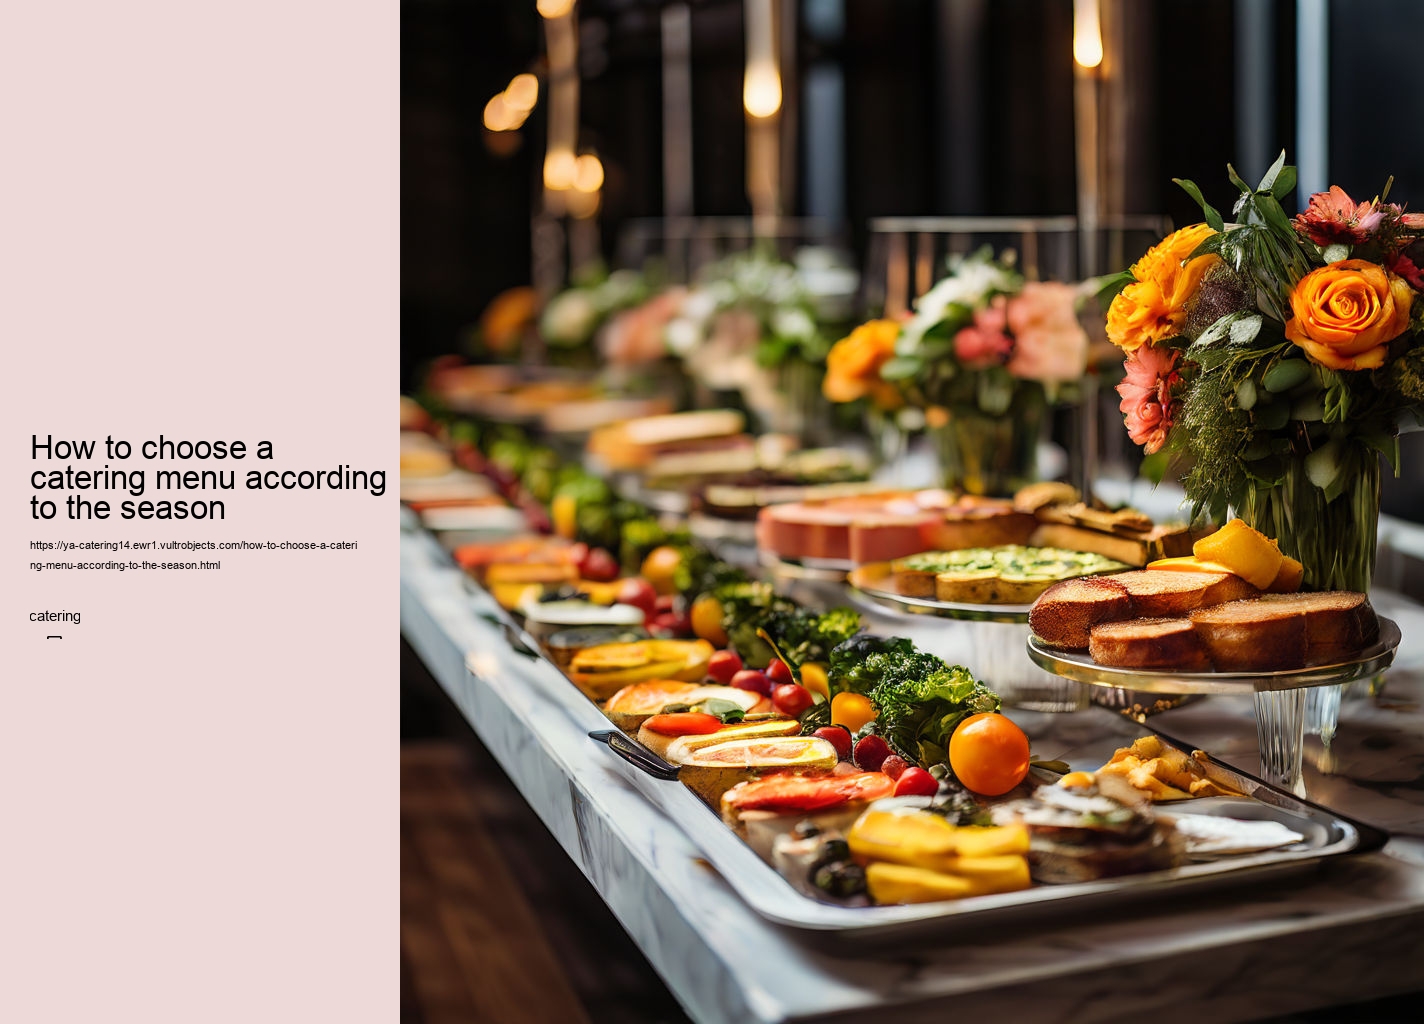 How to choose a catering menu according to the season